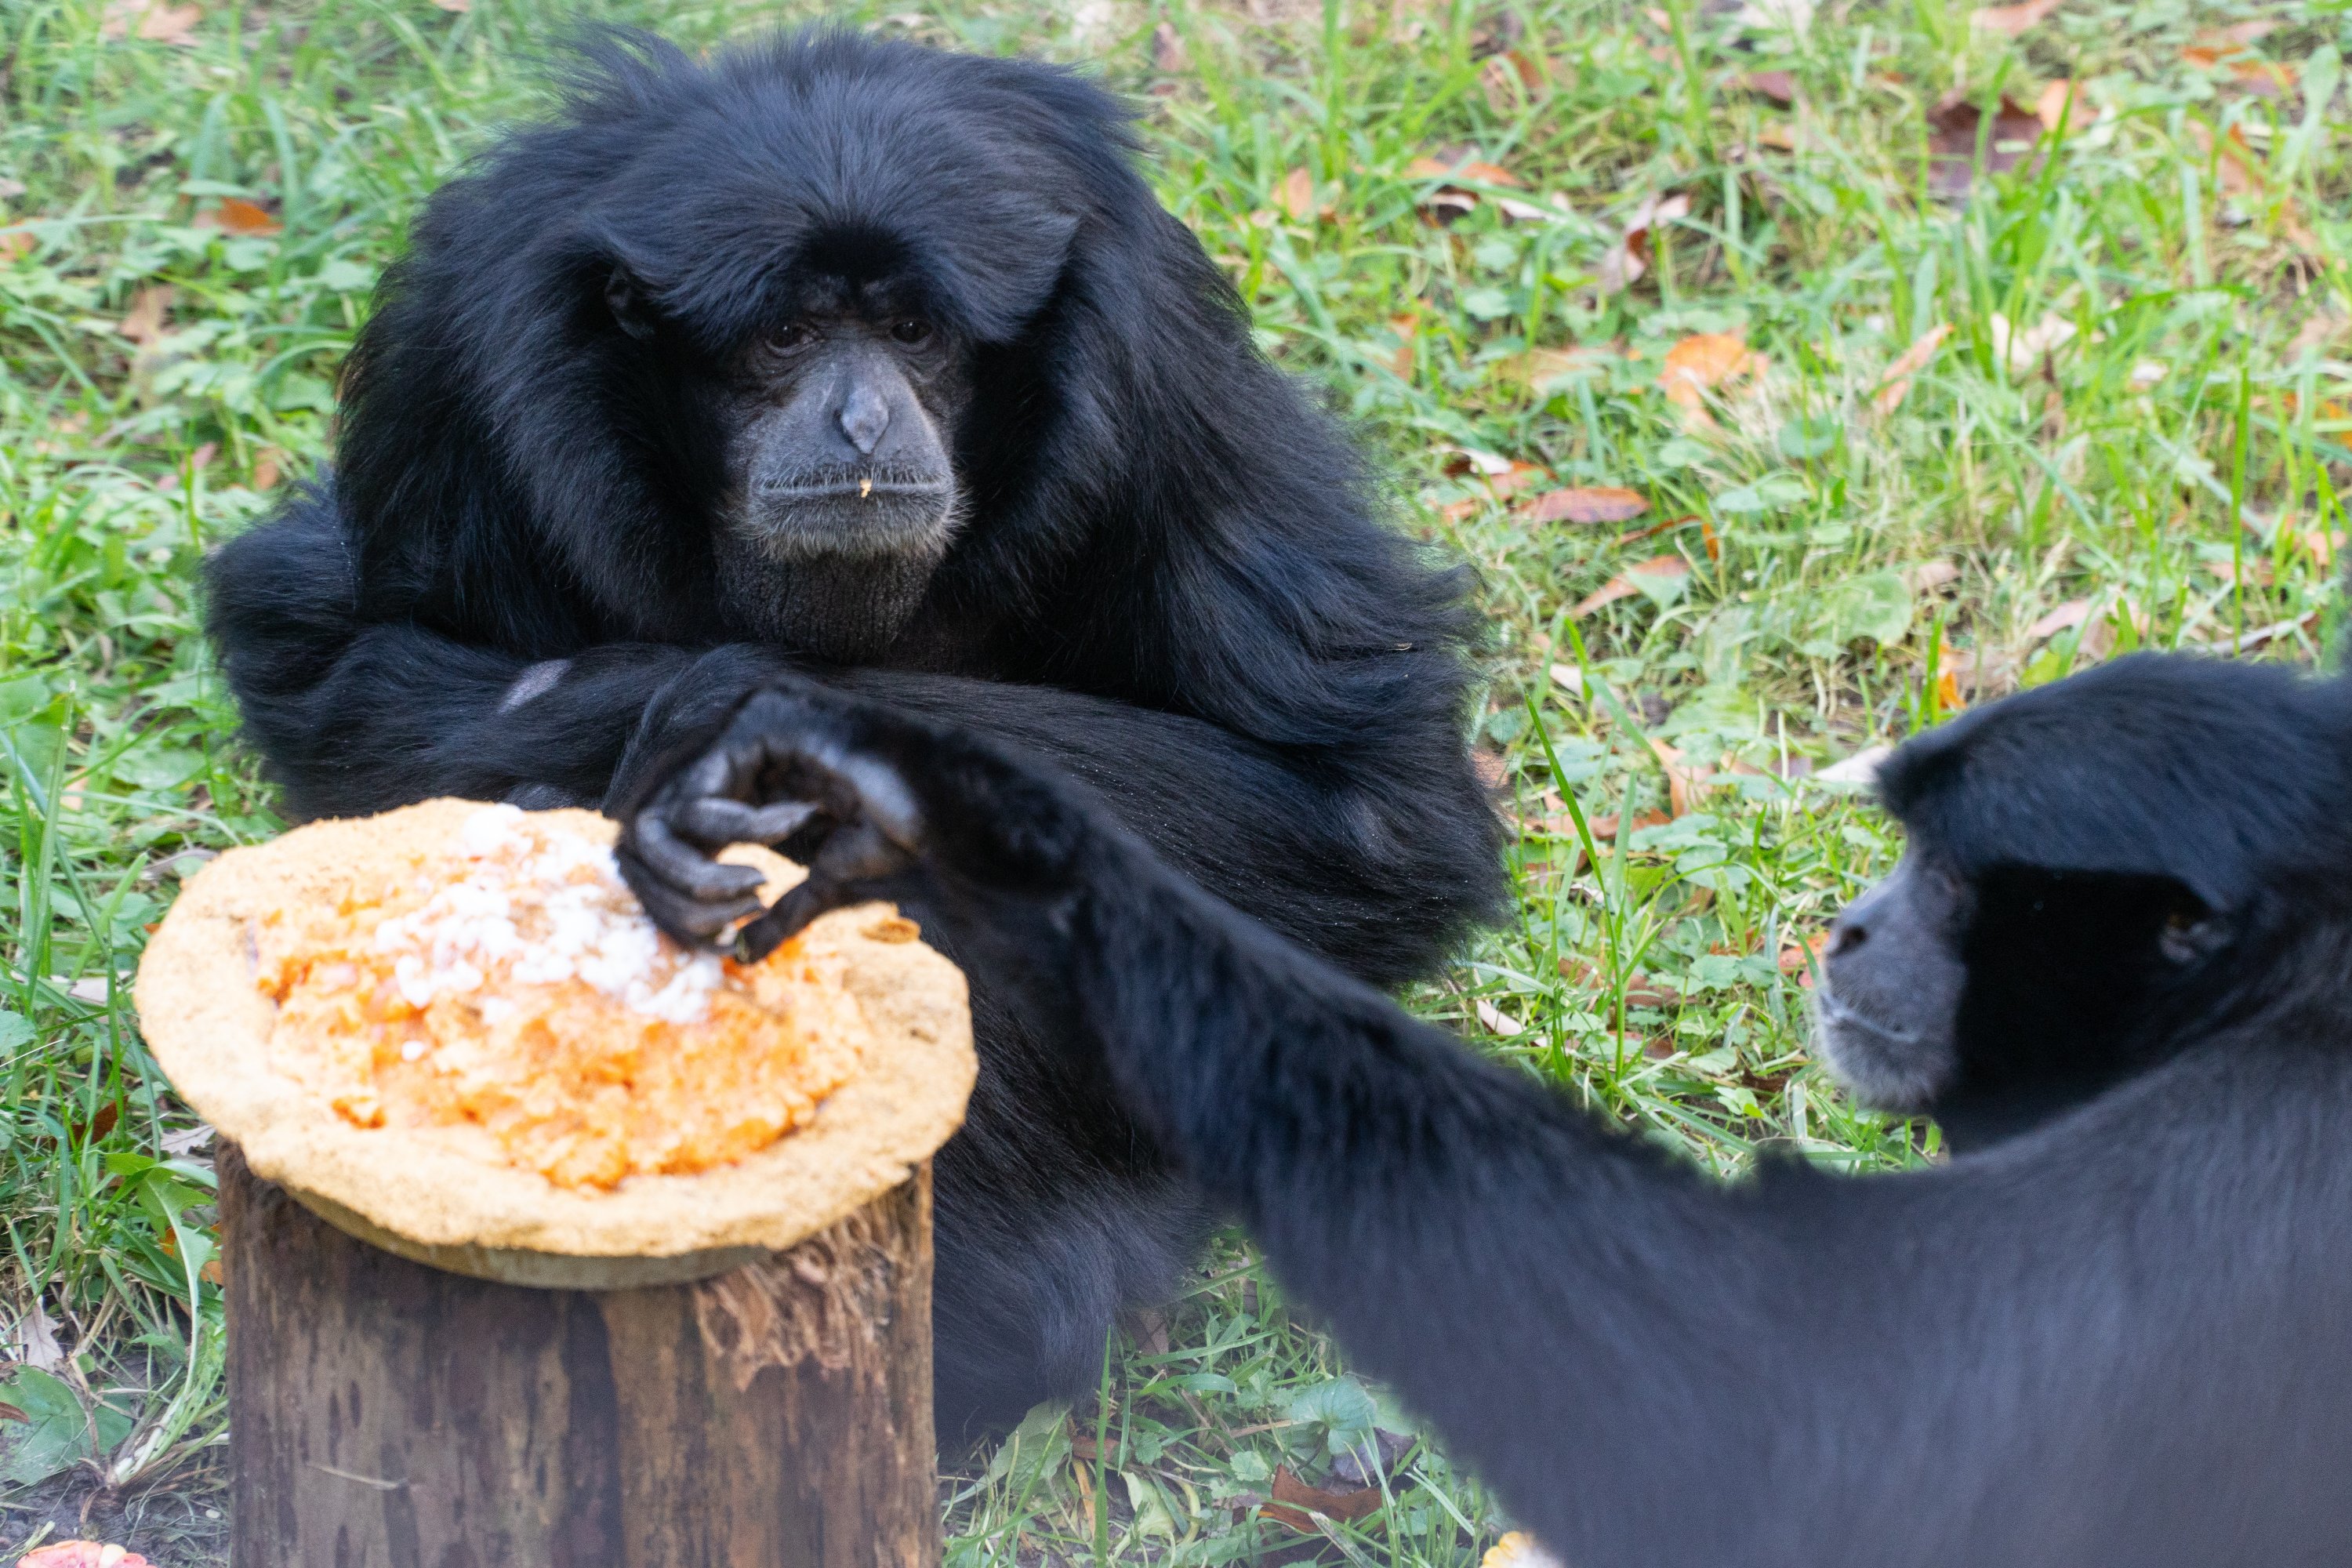 Holiday Cakes for Animals at DC's National Zoo